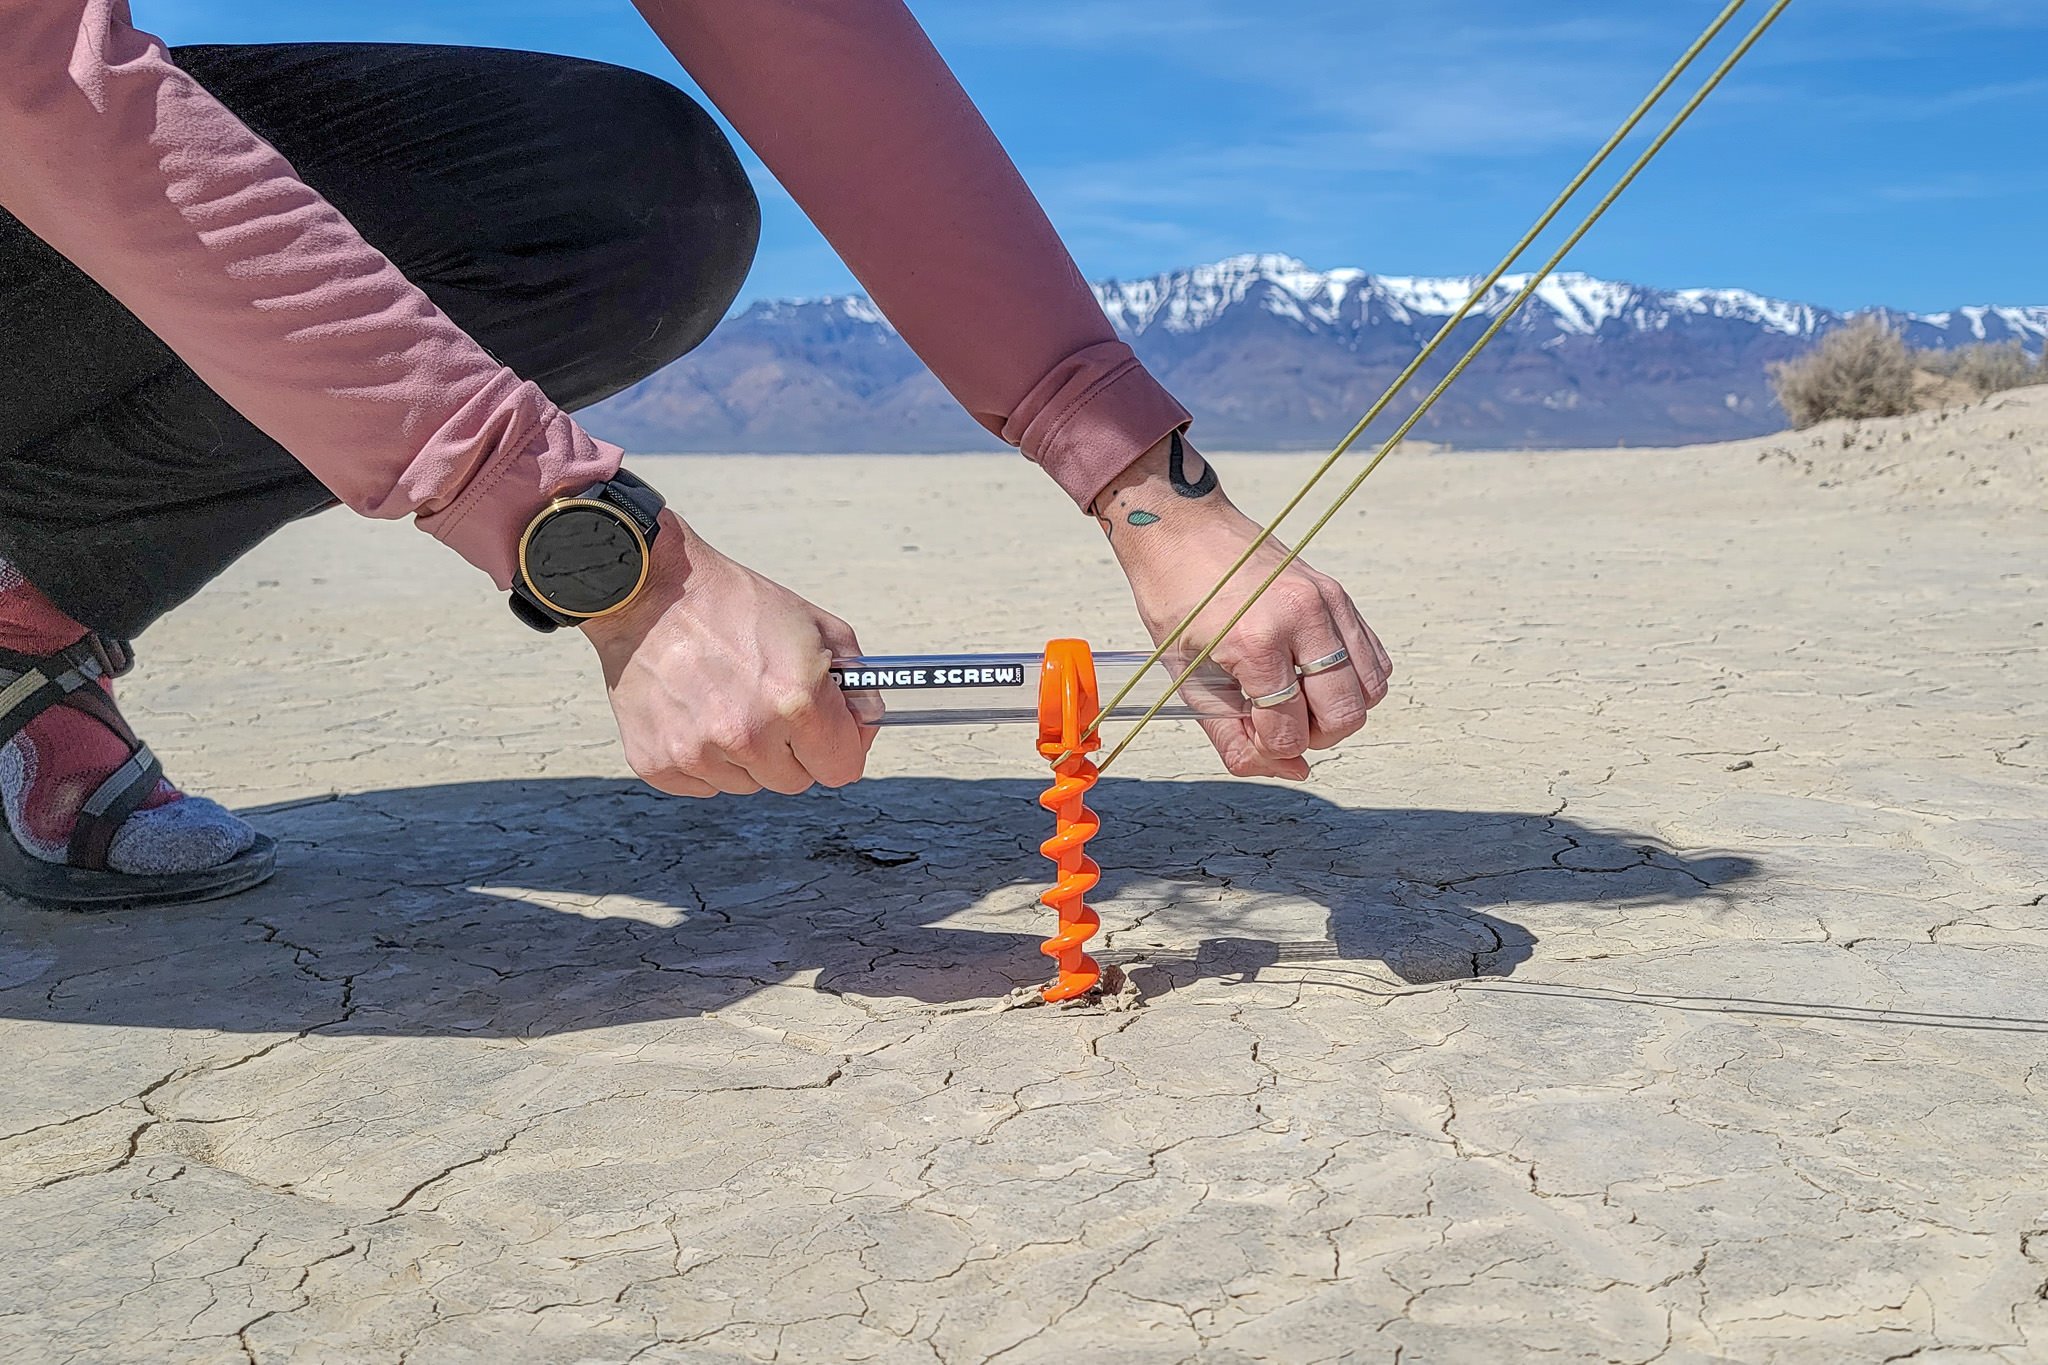 Closeup of the Orangescrew Anchor being used in the Alvord Desert